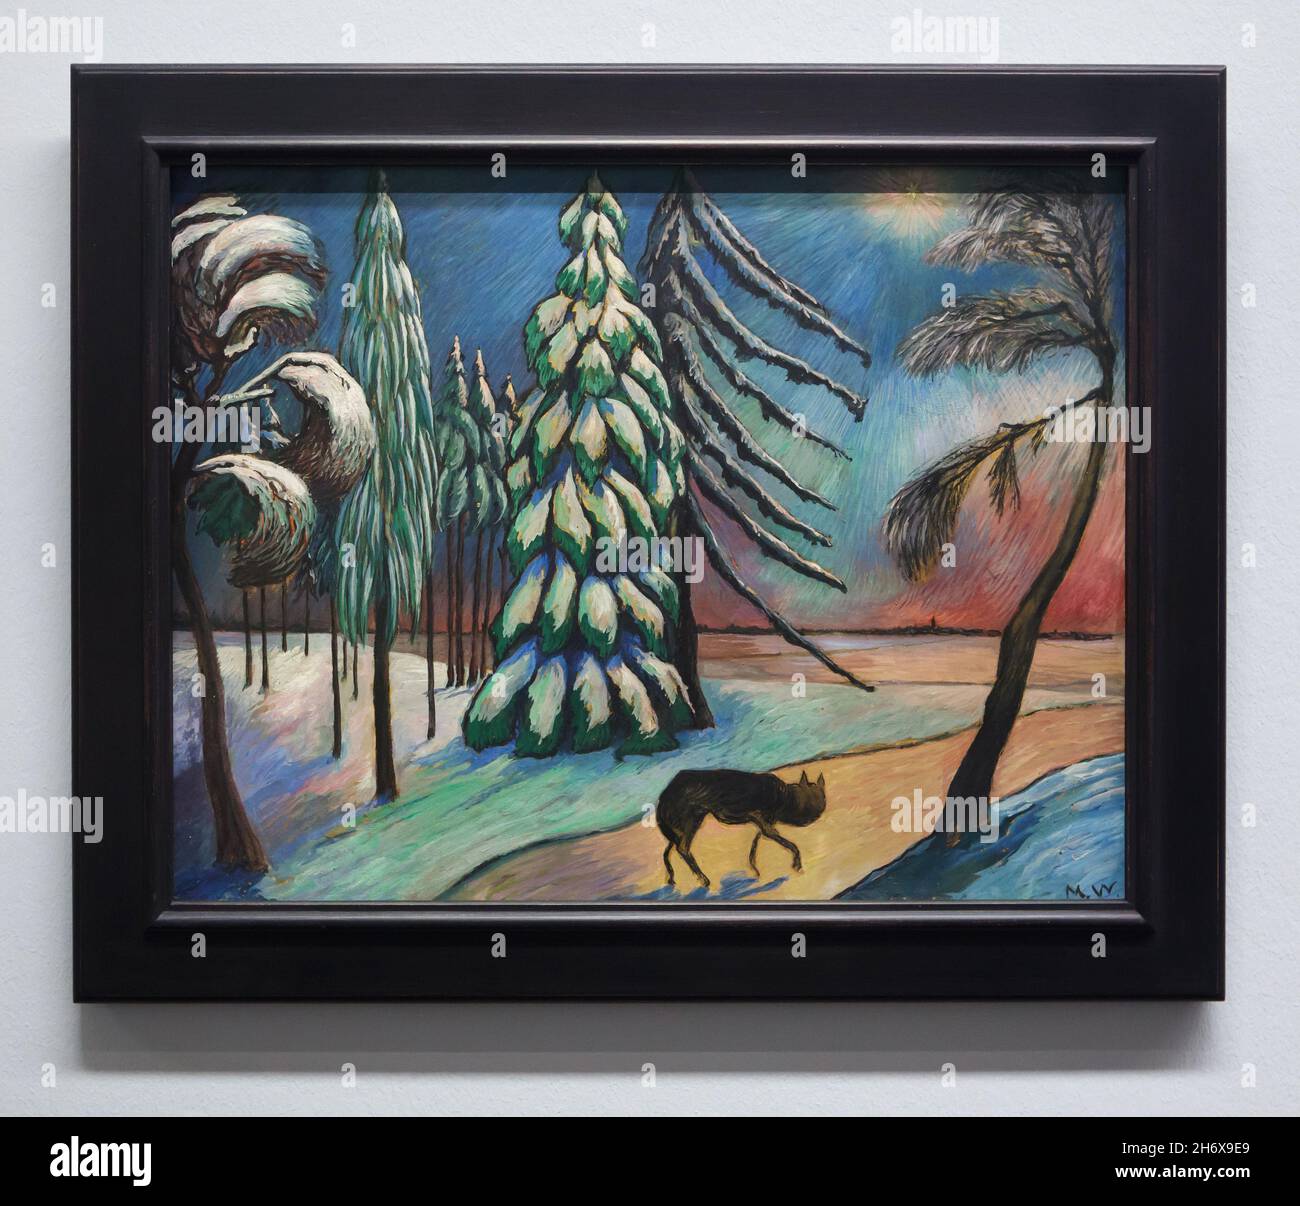 Painting 'Night Prowler' by Russian expressionist painter Marianne von Werefkin (1920) on display in the Albertina Museum in Vienna, Austria. Stock Photo